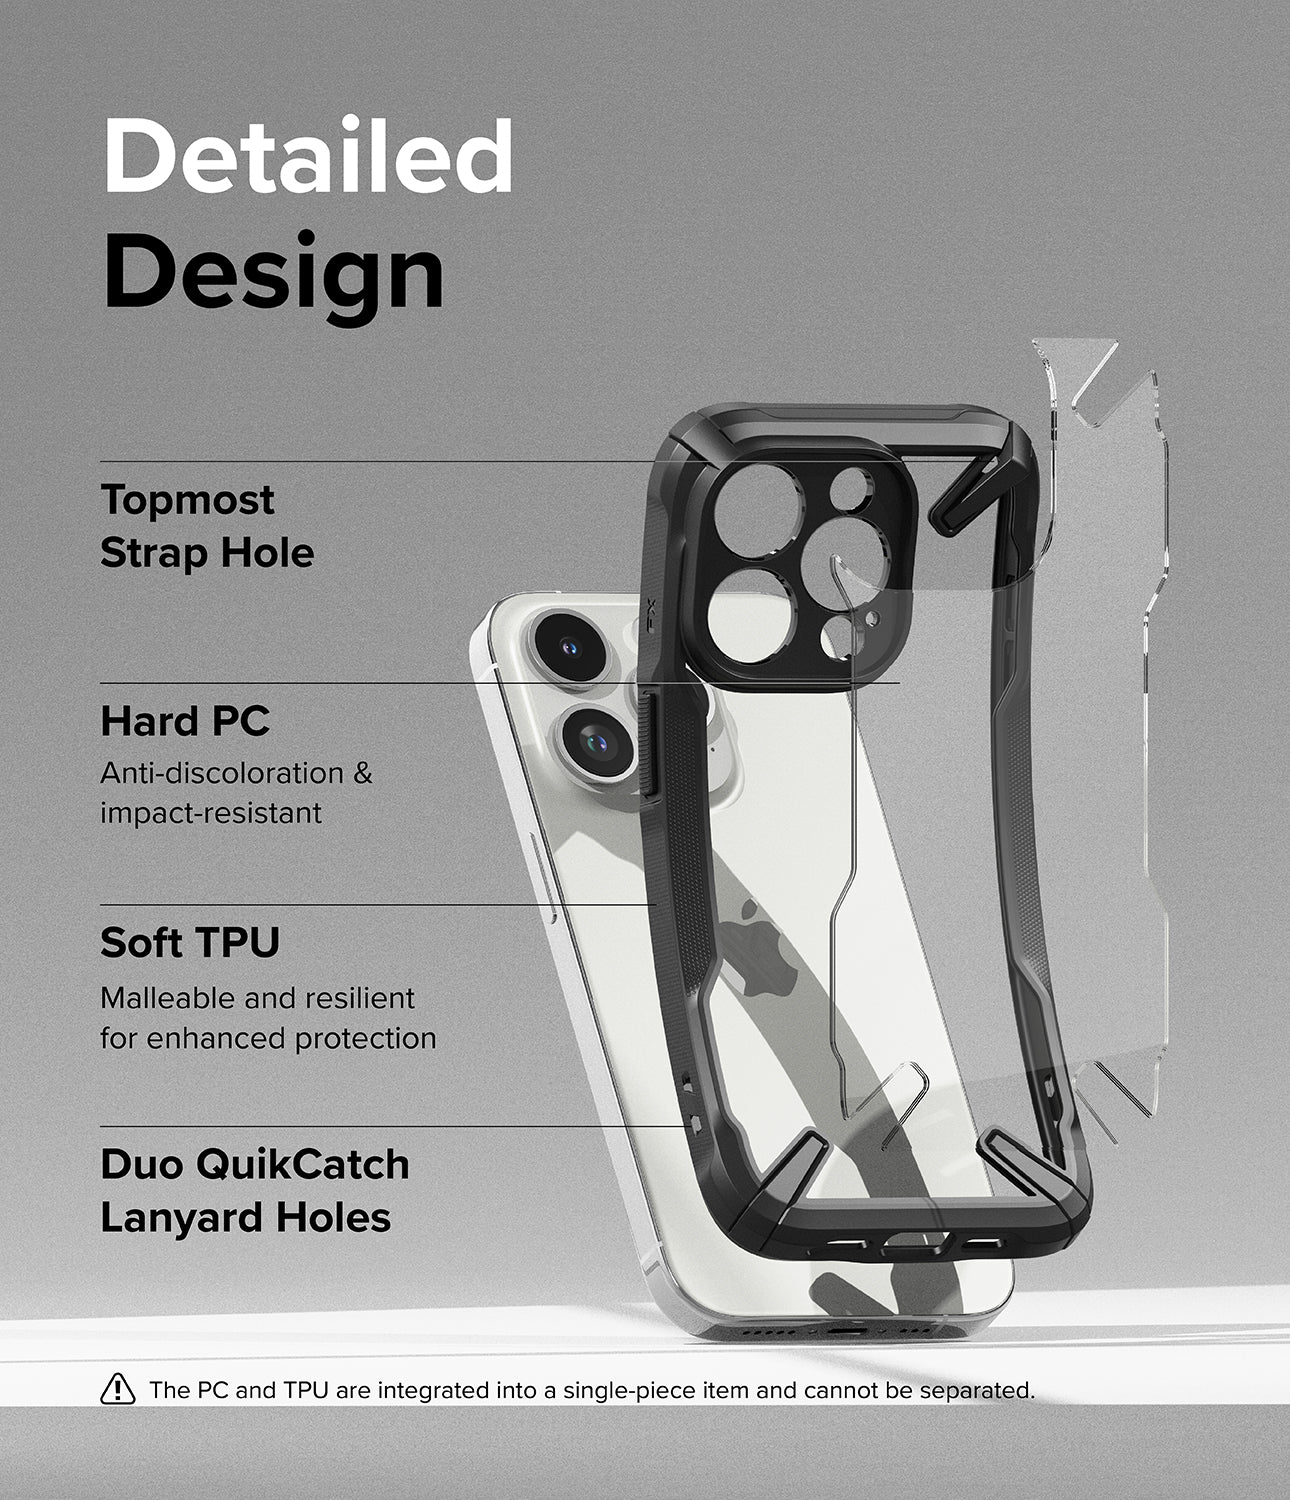 iPhone 15 Pro Case | Fusion-X - Black - Detailed Design. Topmost Strap Hole. Anti-discoloration and impact resistant with Hard PC. Malleable and resilient for enhanced protection with Soft TPU. Duo QuikCatch Lanyard Holes.